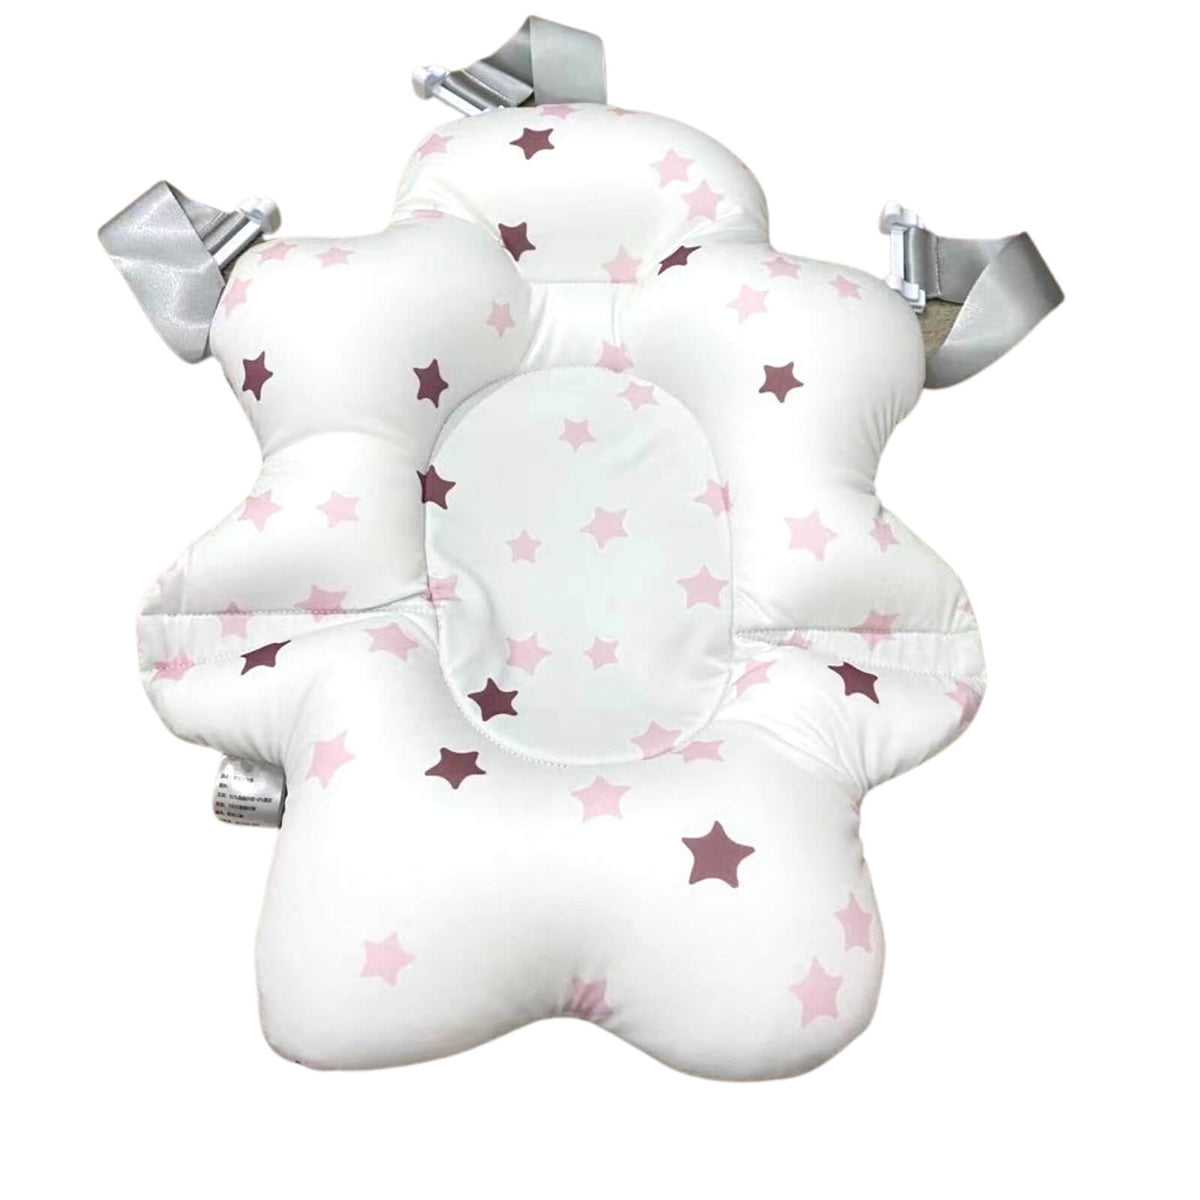 Soft Quick Drying Baby Bath Seat-Pink